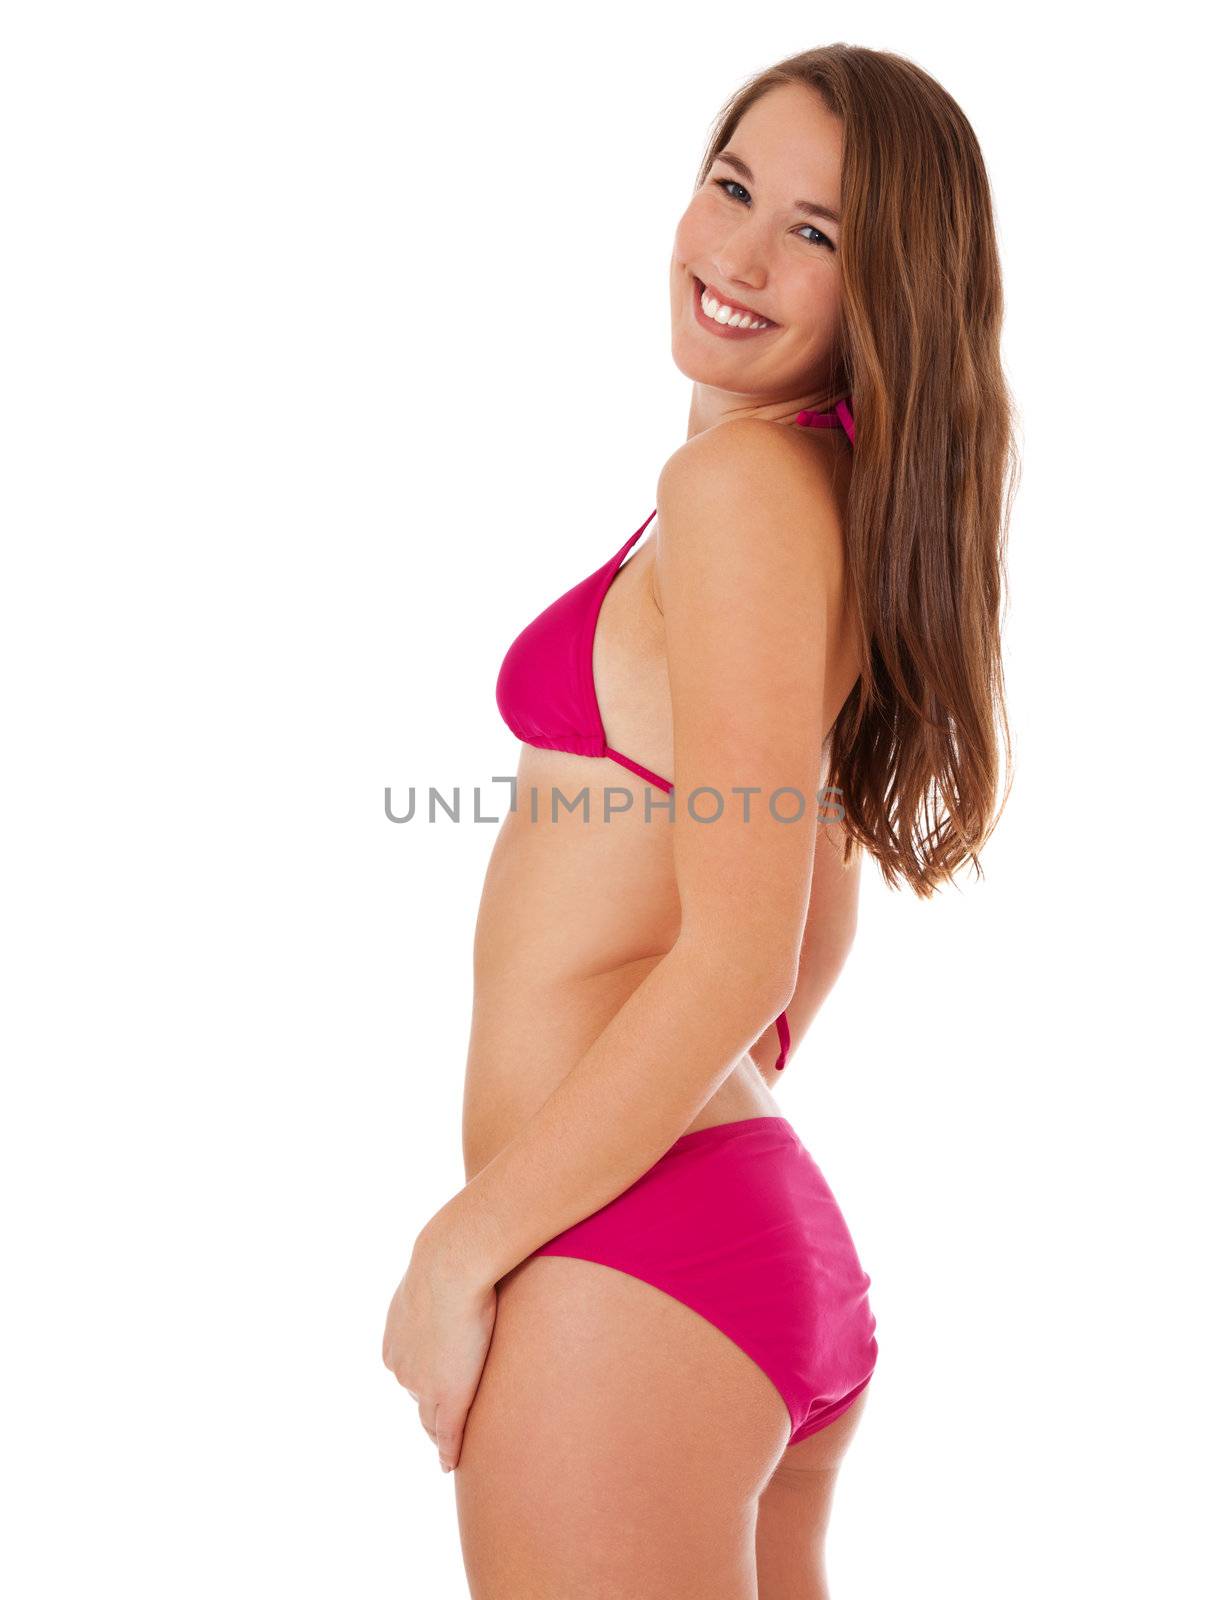 Attractive young woman in bikini. All on white background.